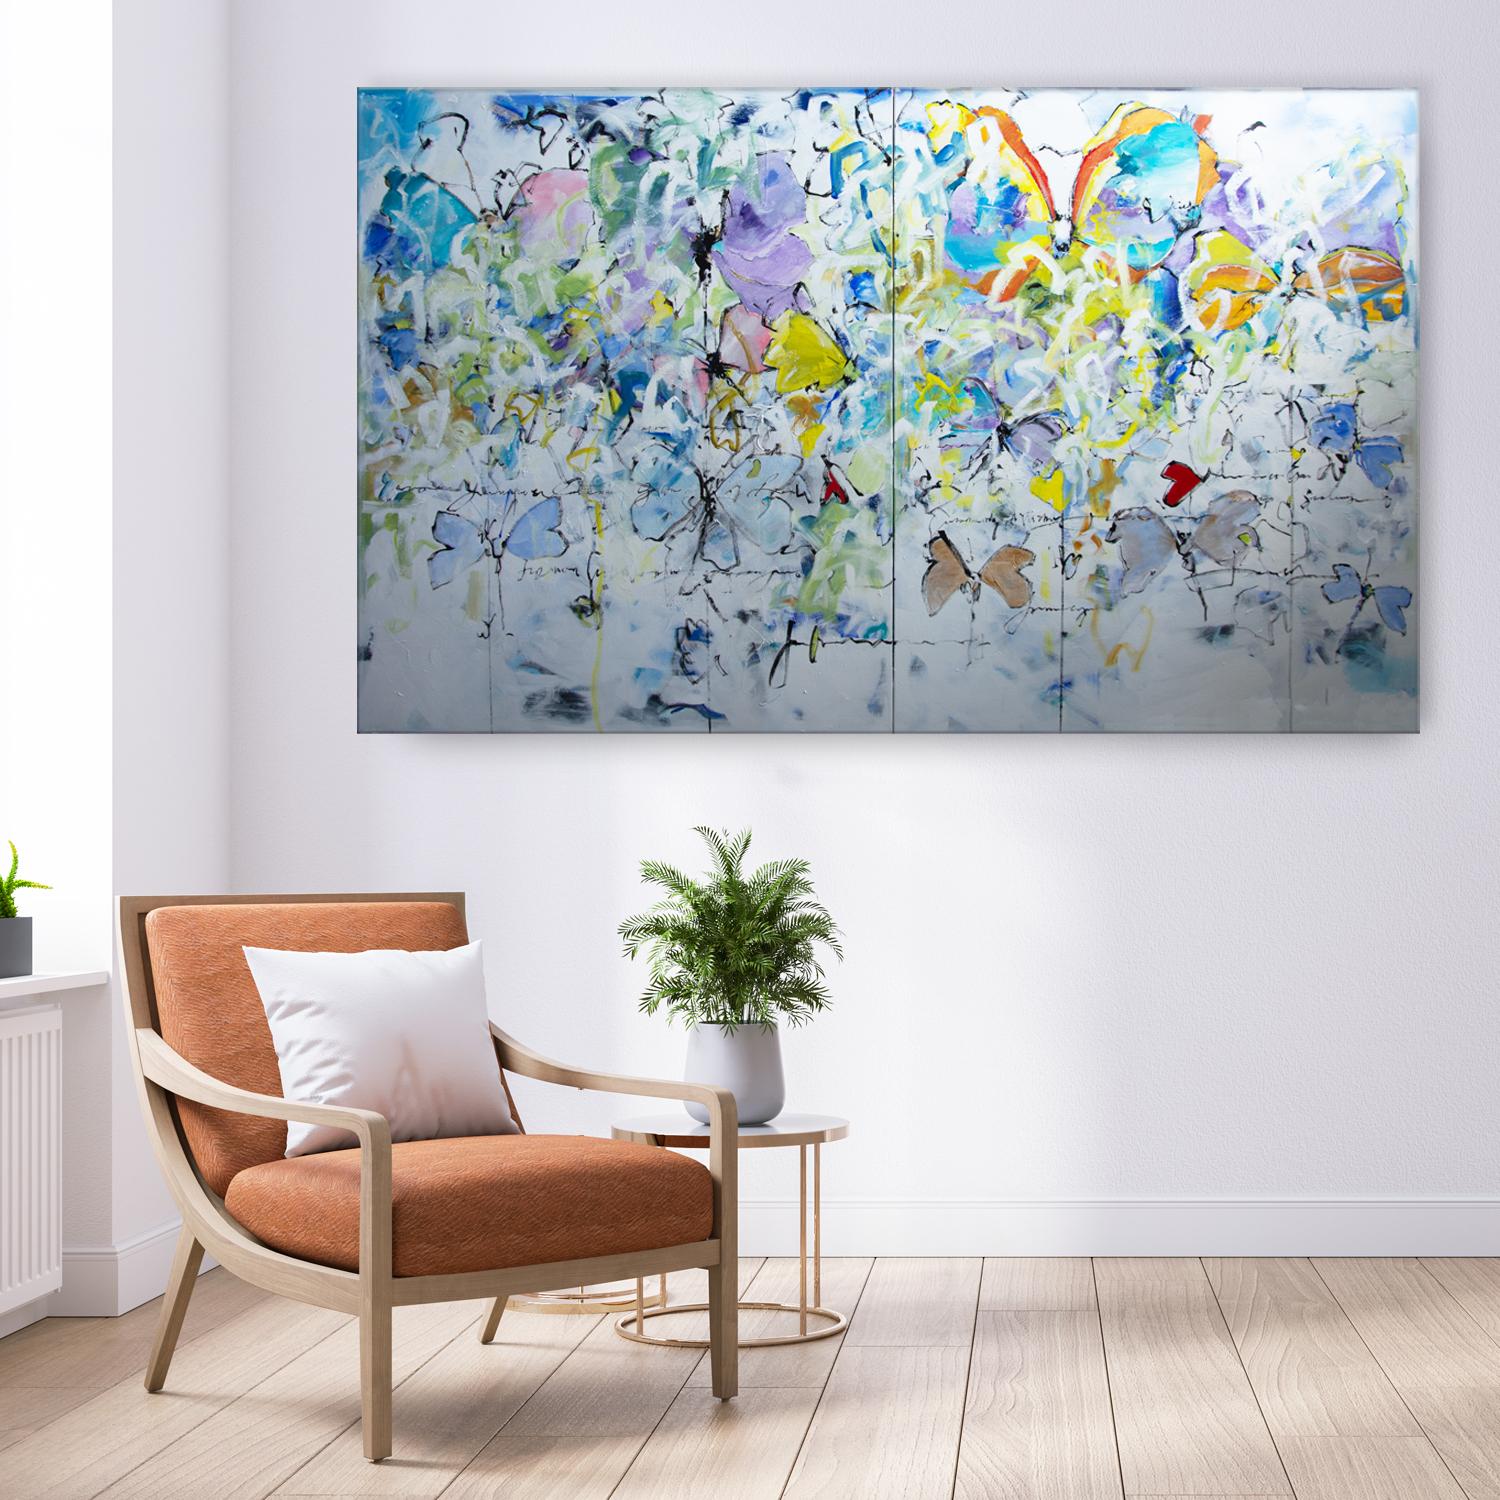 One of a Kind Original 'Garden View' by Salvatore Principe - Abstract Mixed Media Art by Salvatore Principe 